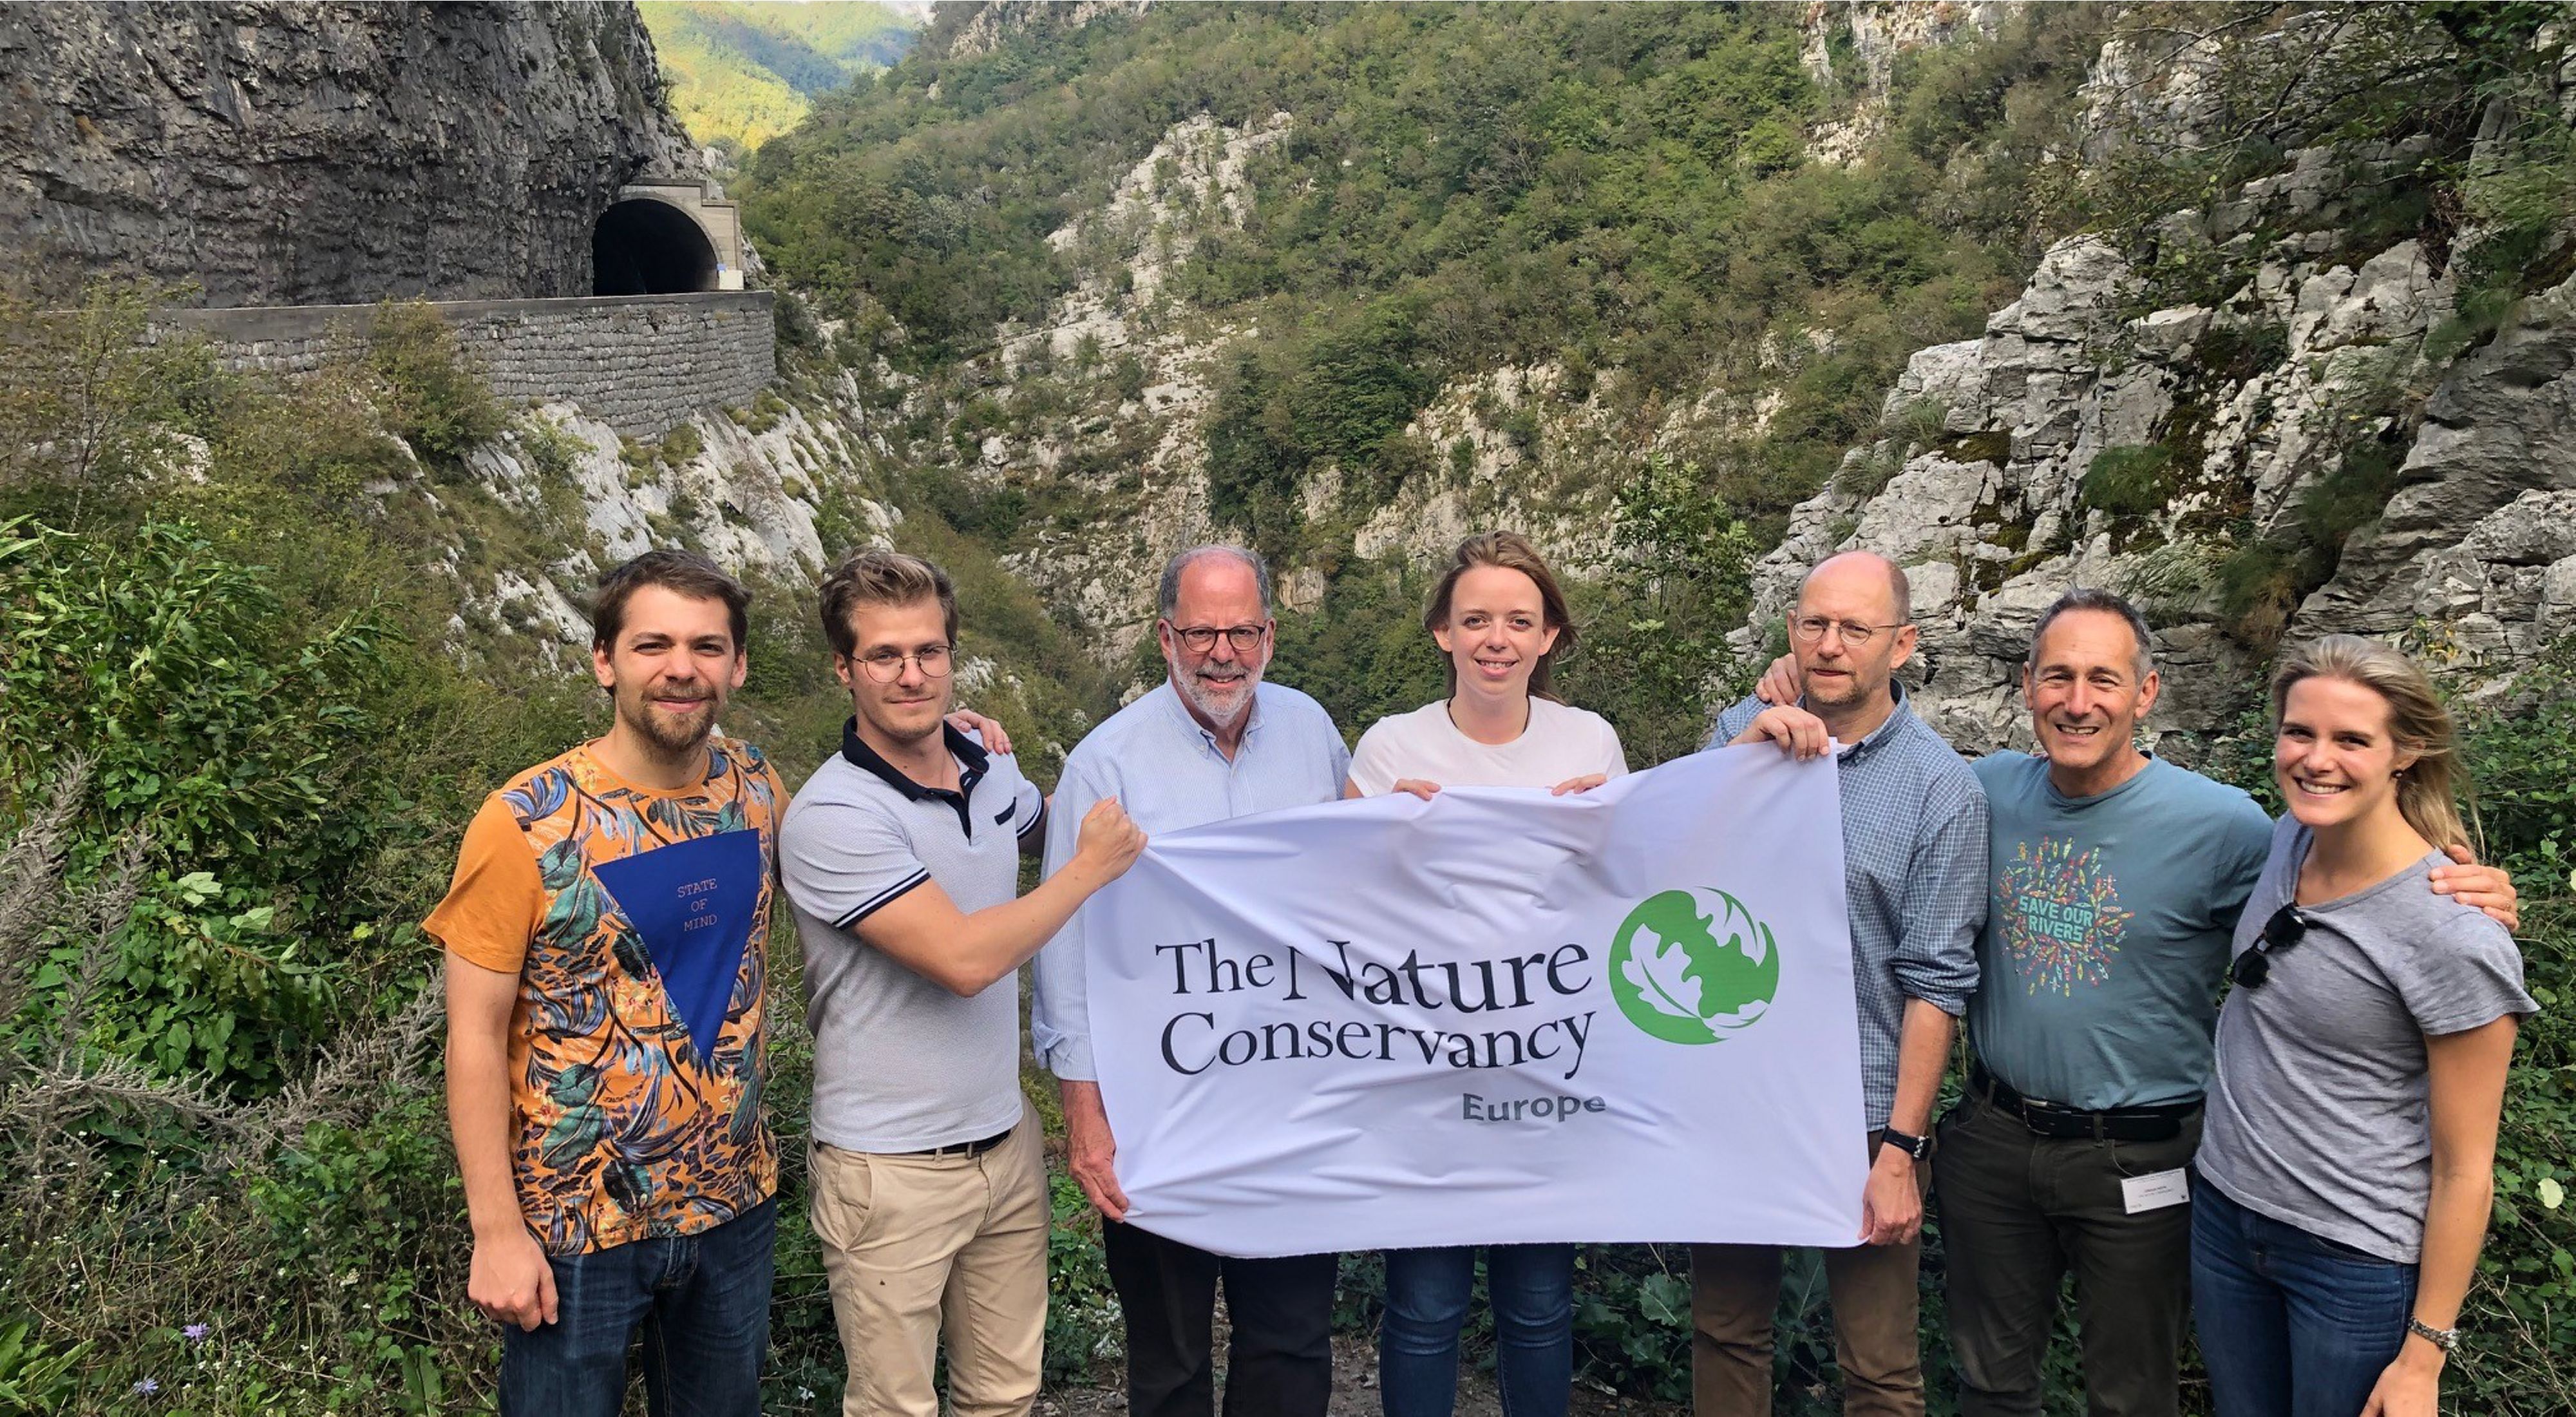 Seven people stand together holding a cloth banner with TNC's logo on it with a rocky gorge in the background.